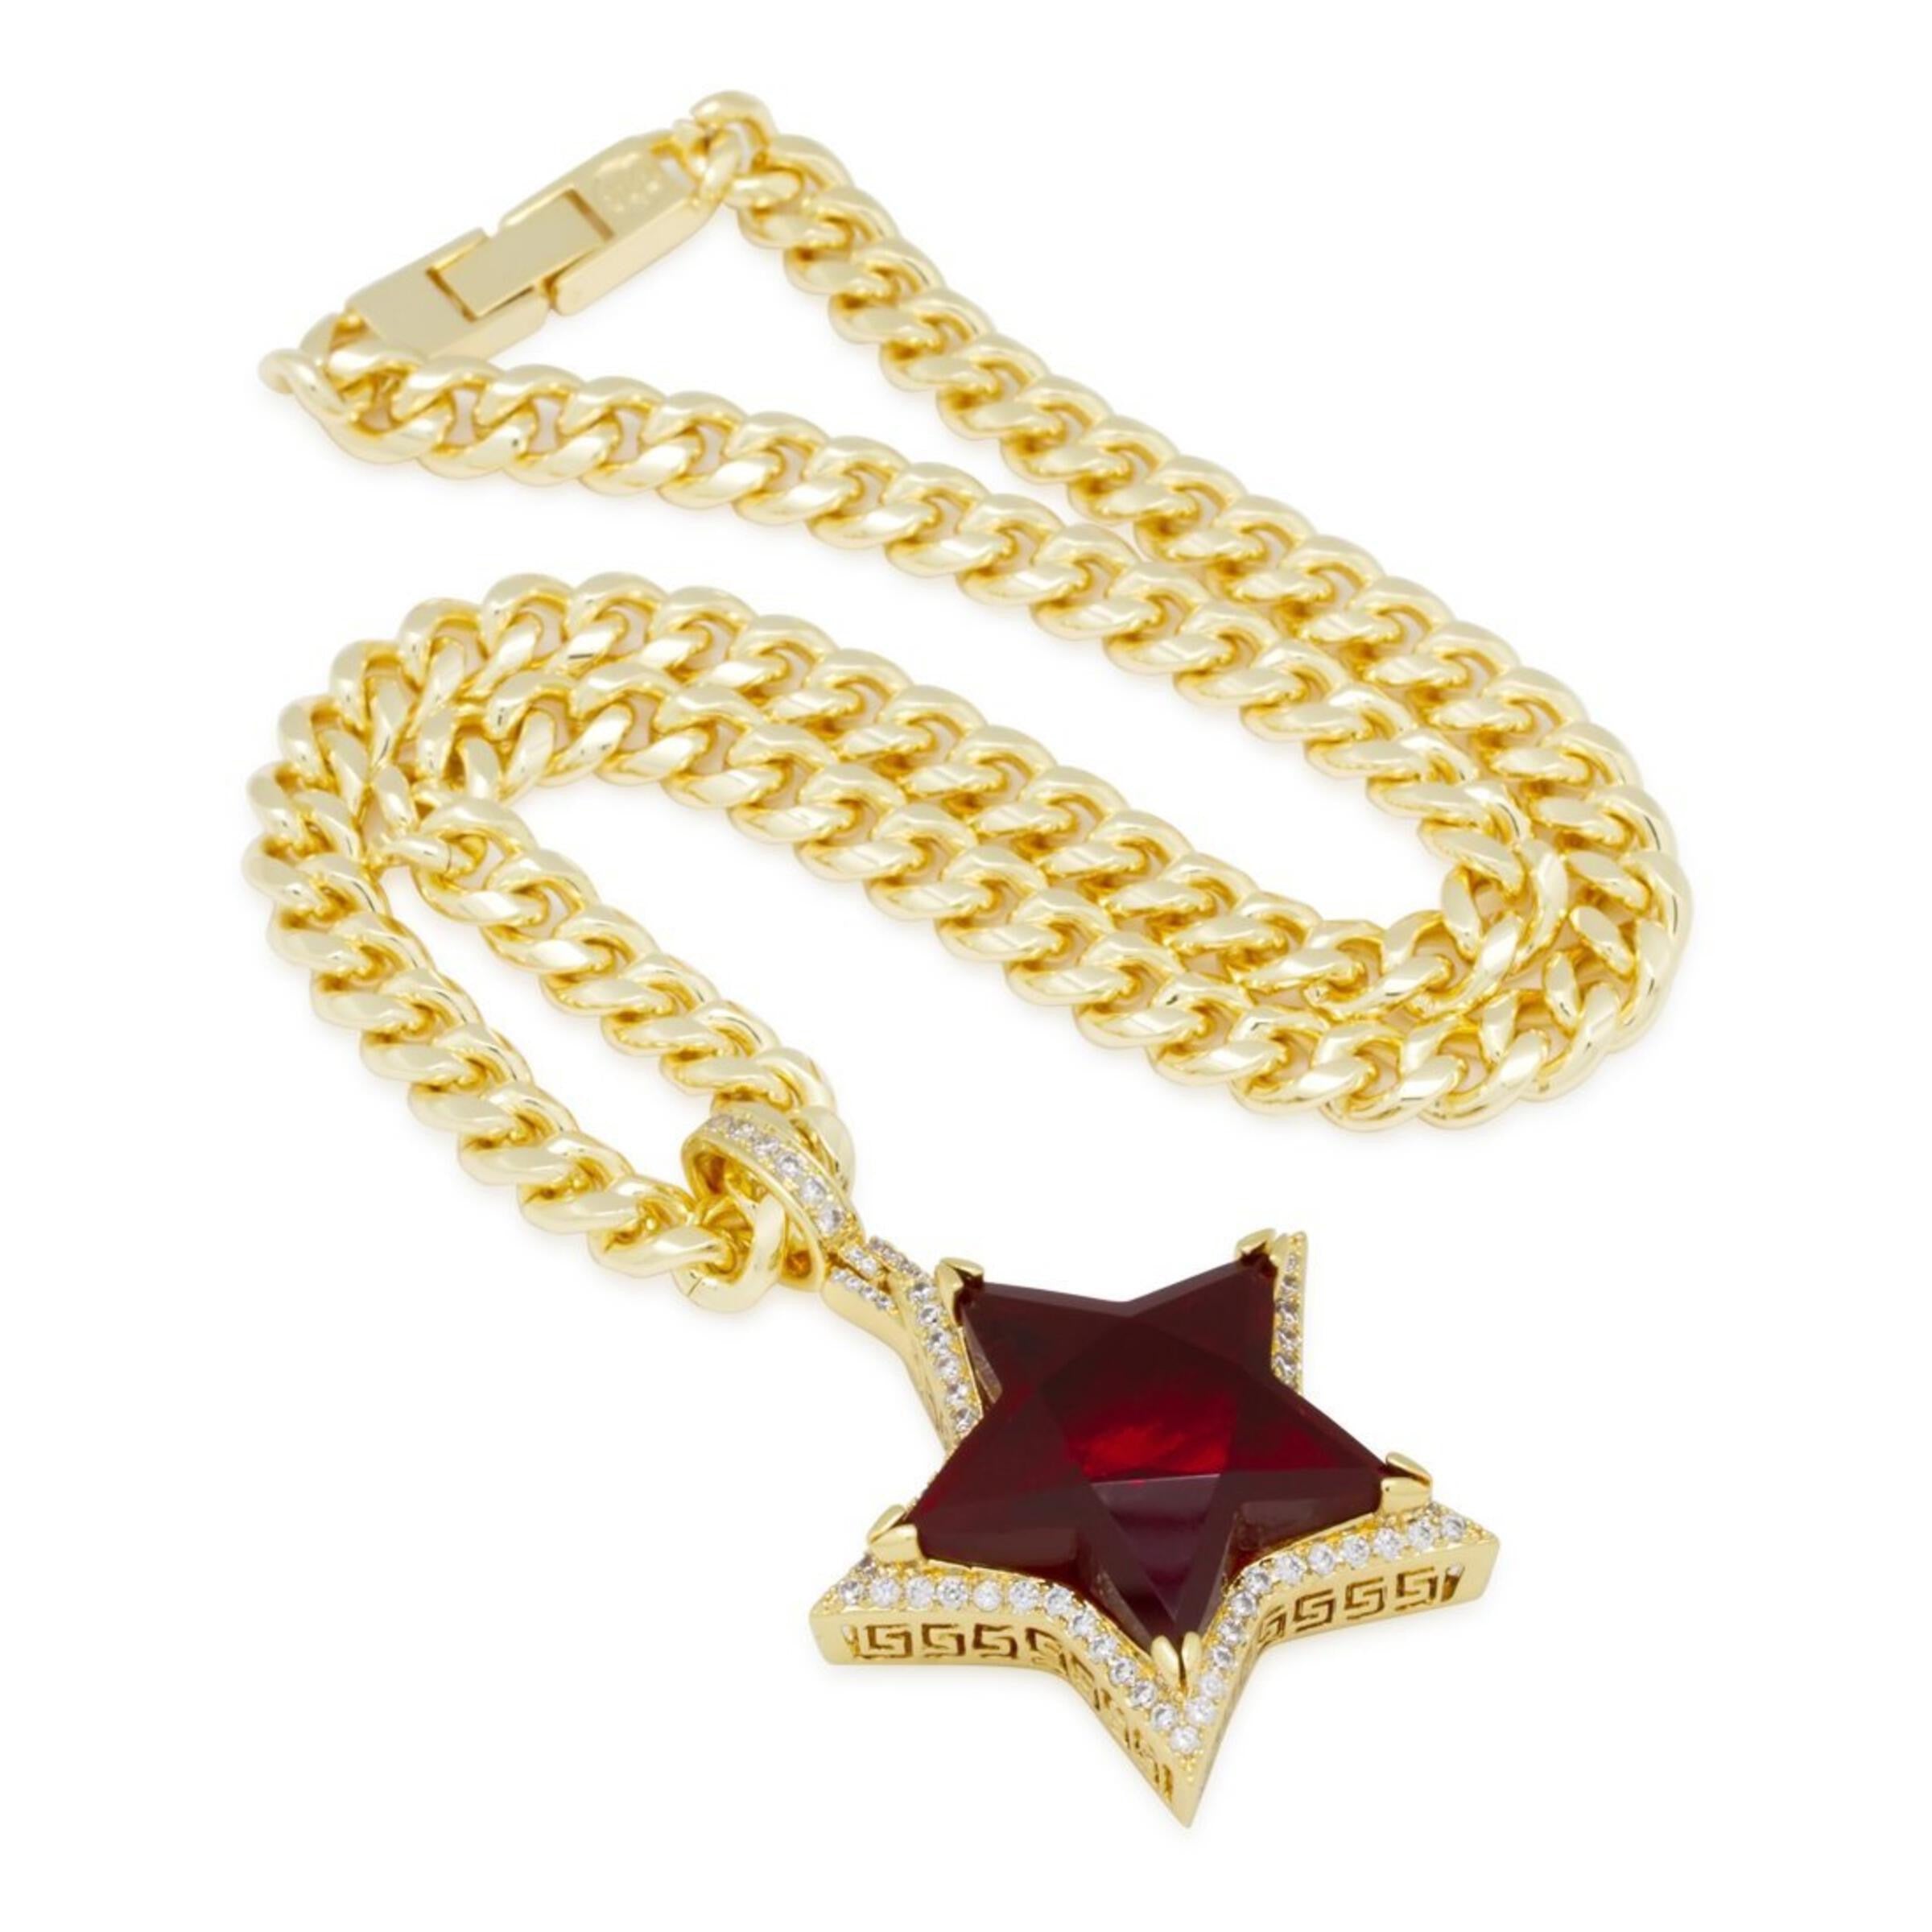 King Ice Ruby Star Necklace - 14K Gold